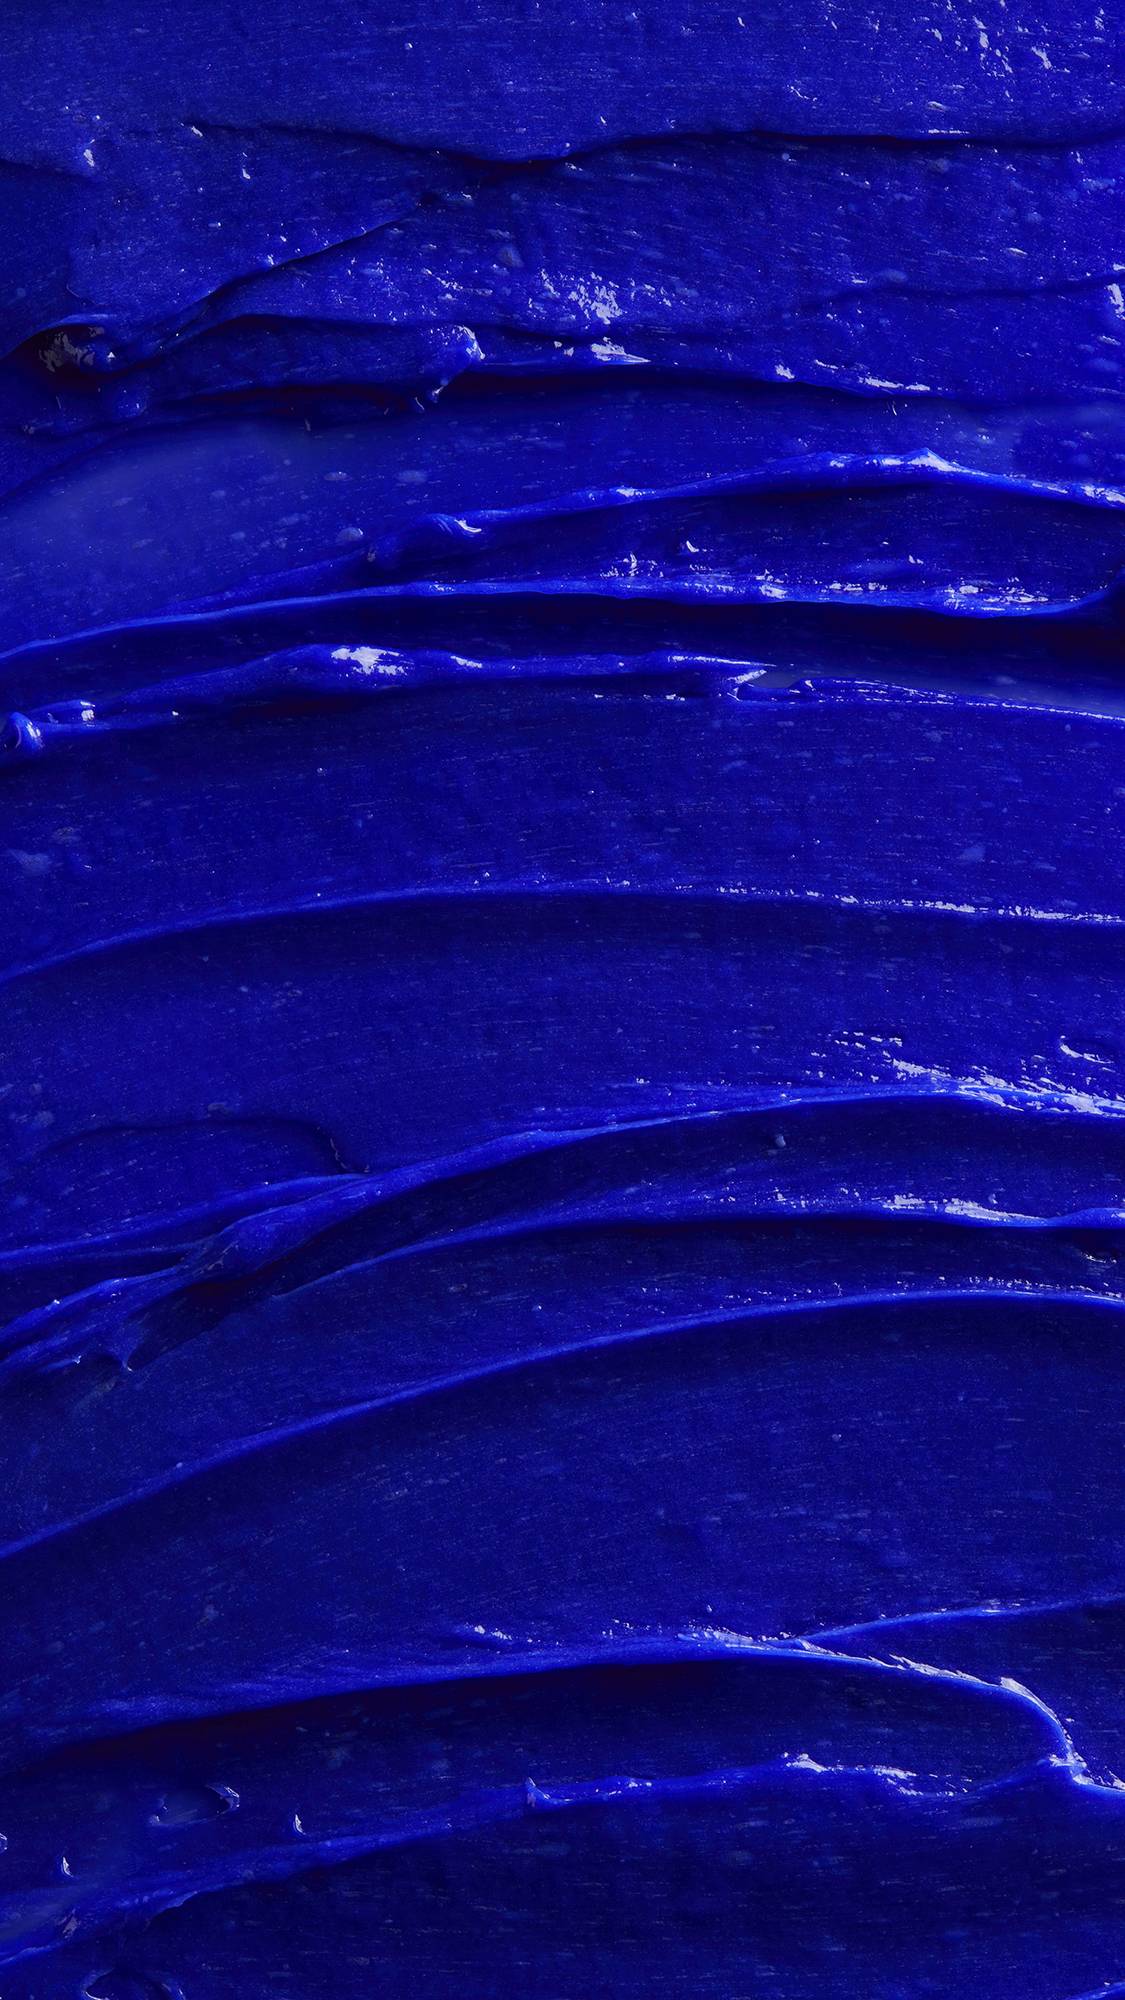 Image is a very defined close-up of the vivid violet shampoo spread covering the screen like a sea of thick blue batter.